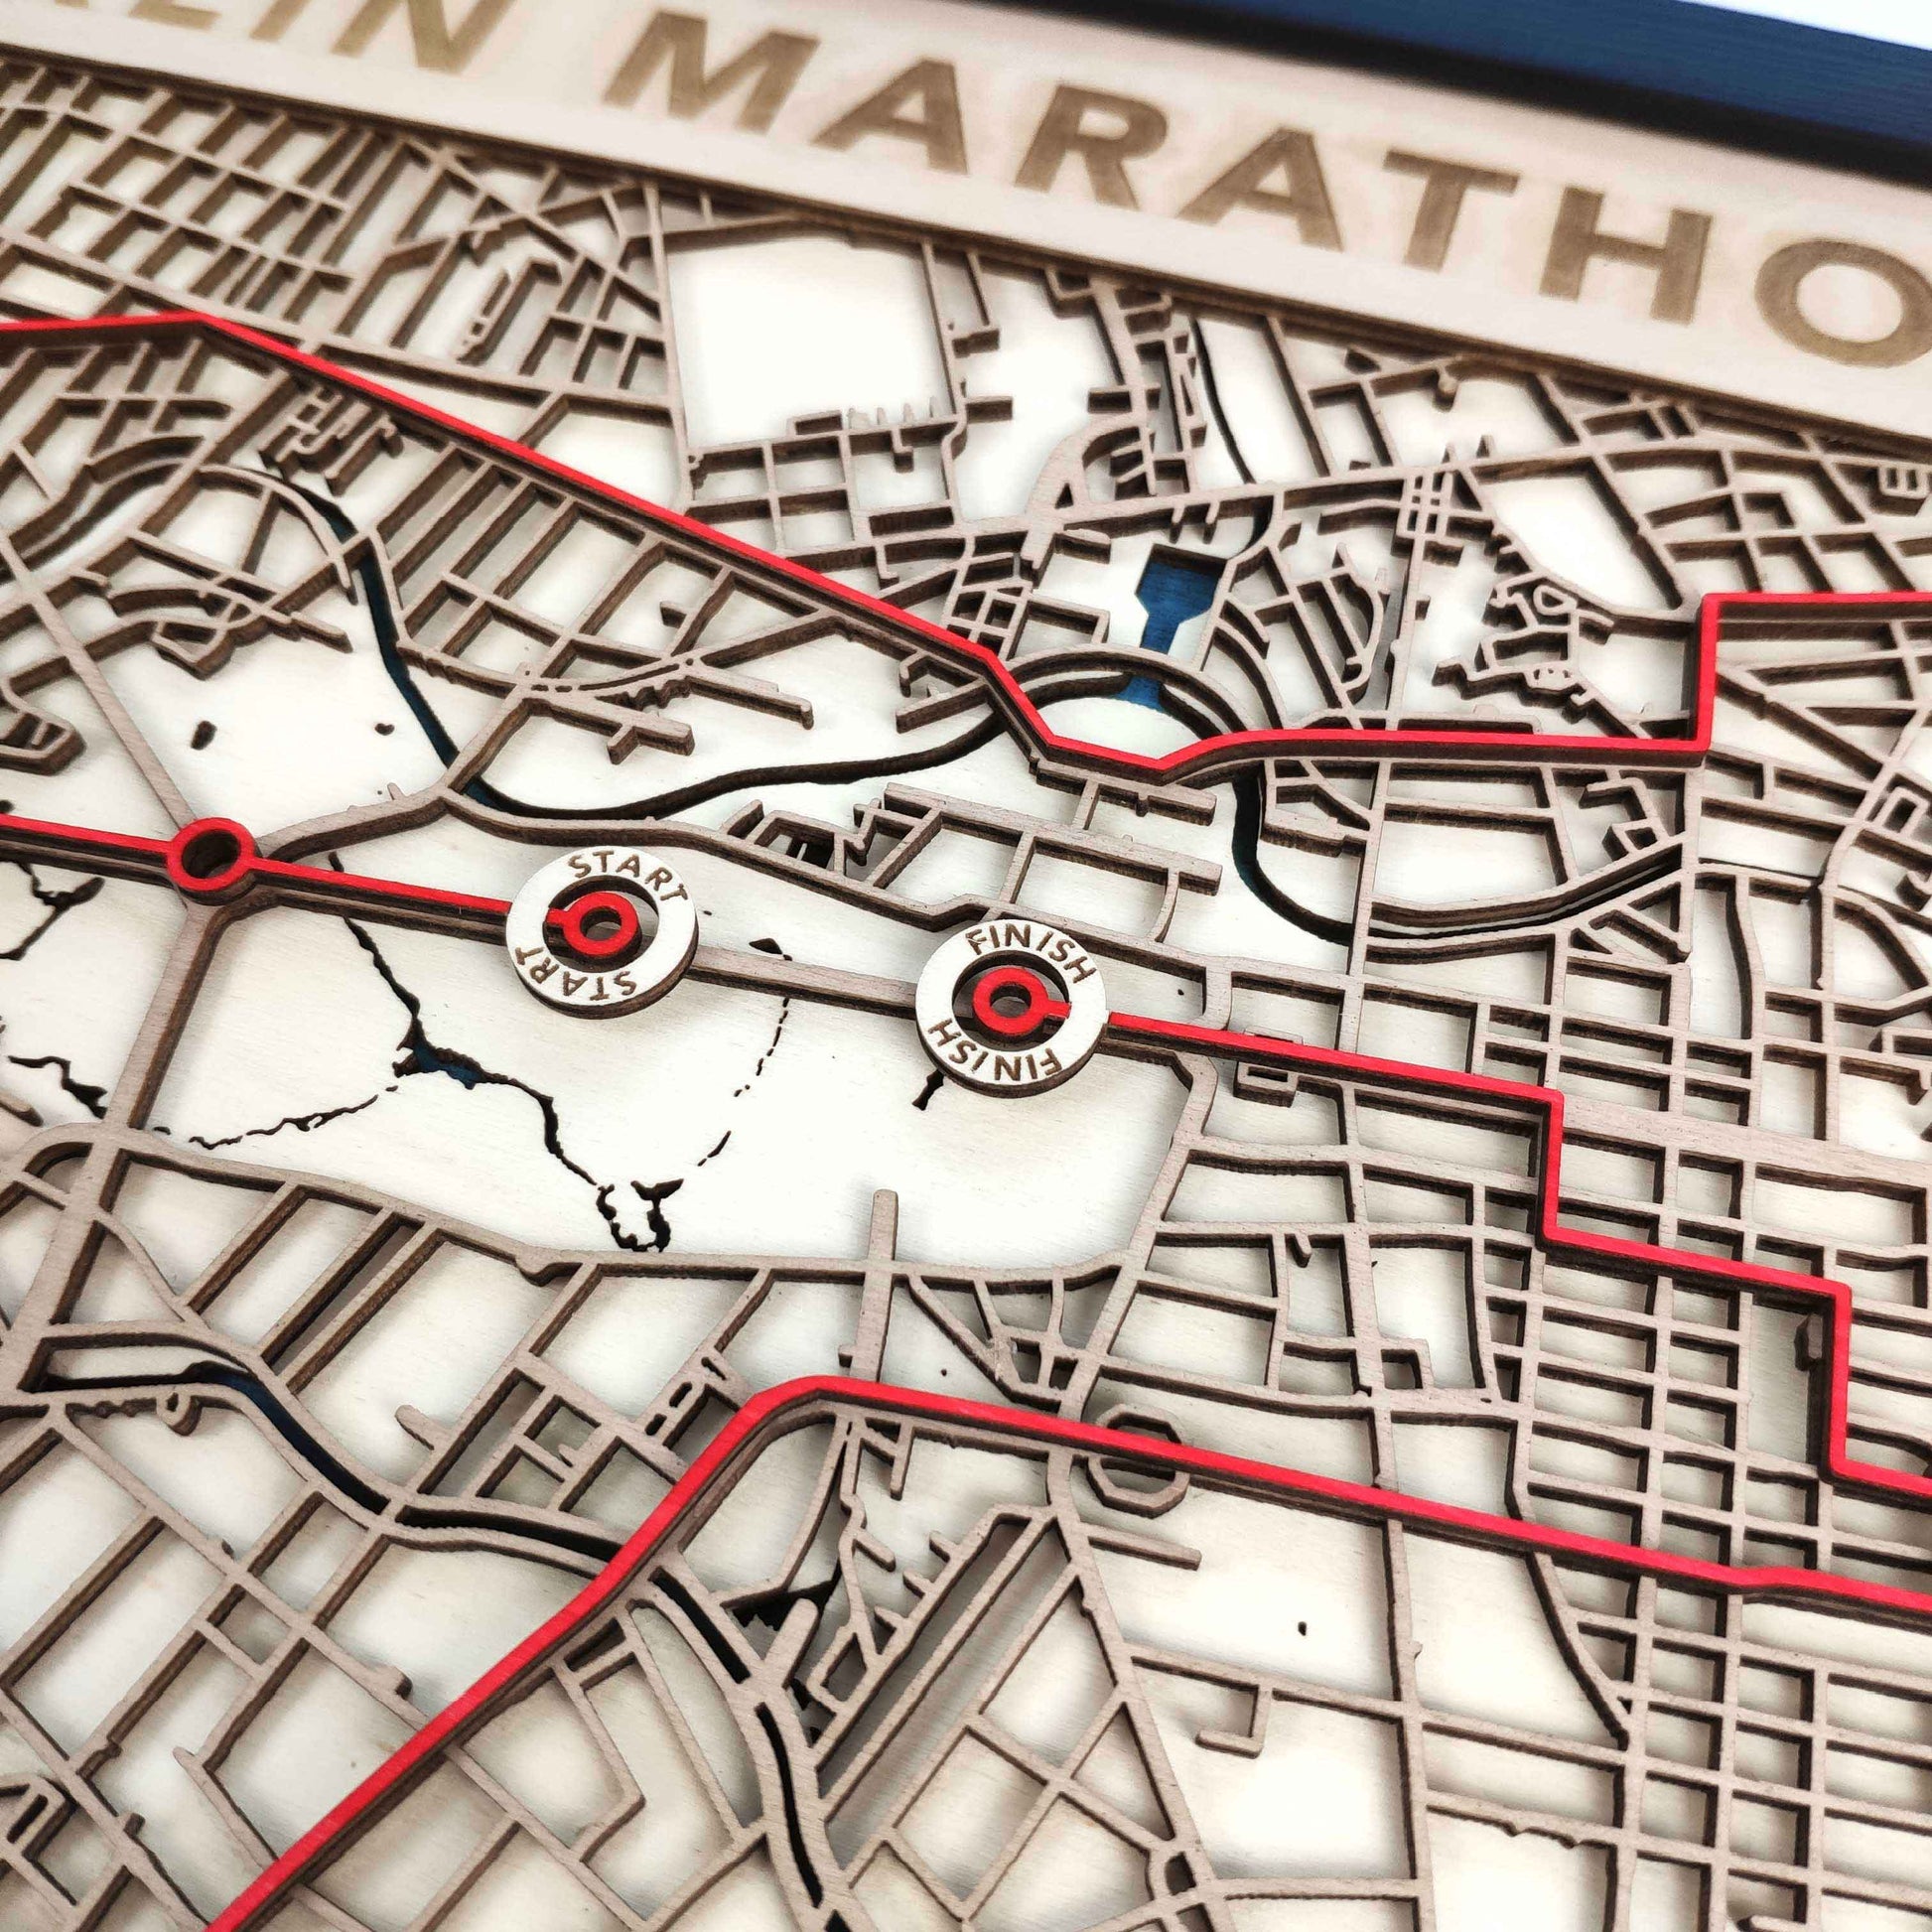 Berlin Marathon Course Map - Wall Art Gift by CityWood - Custom Wood Map Art - Unique Laser Cut Engraved - Anniversary Gift